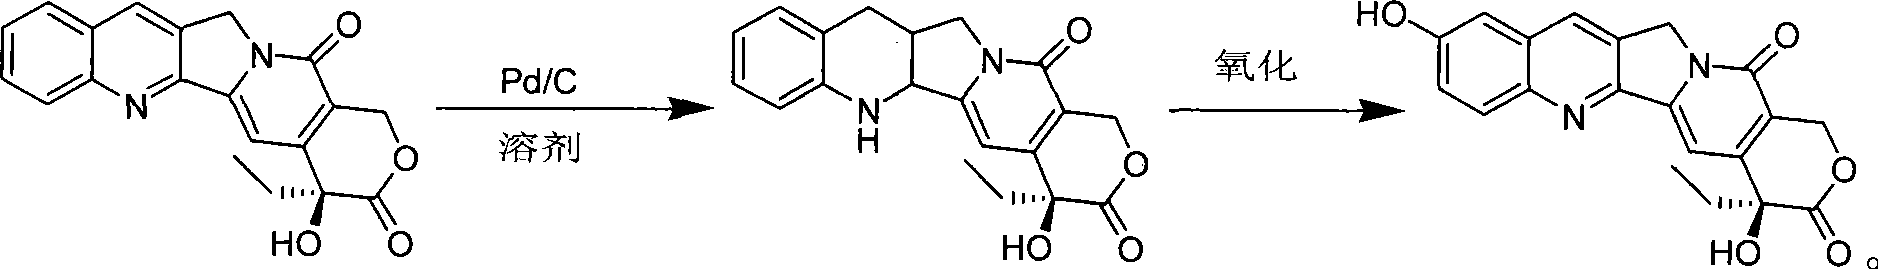 Chemical semi-synthetic process of 10-hydroxycamptothecin